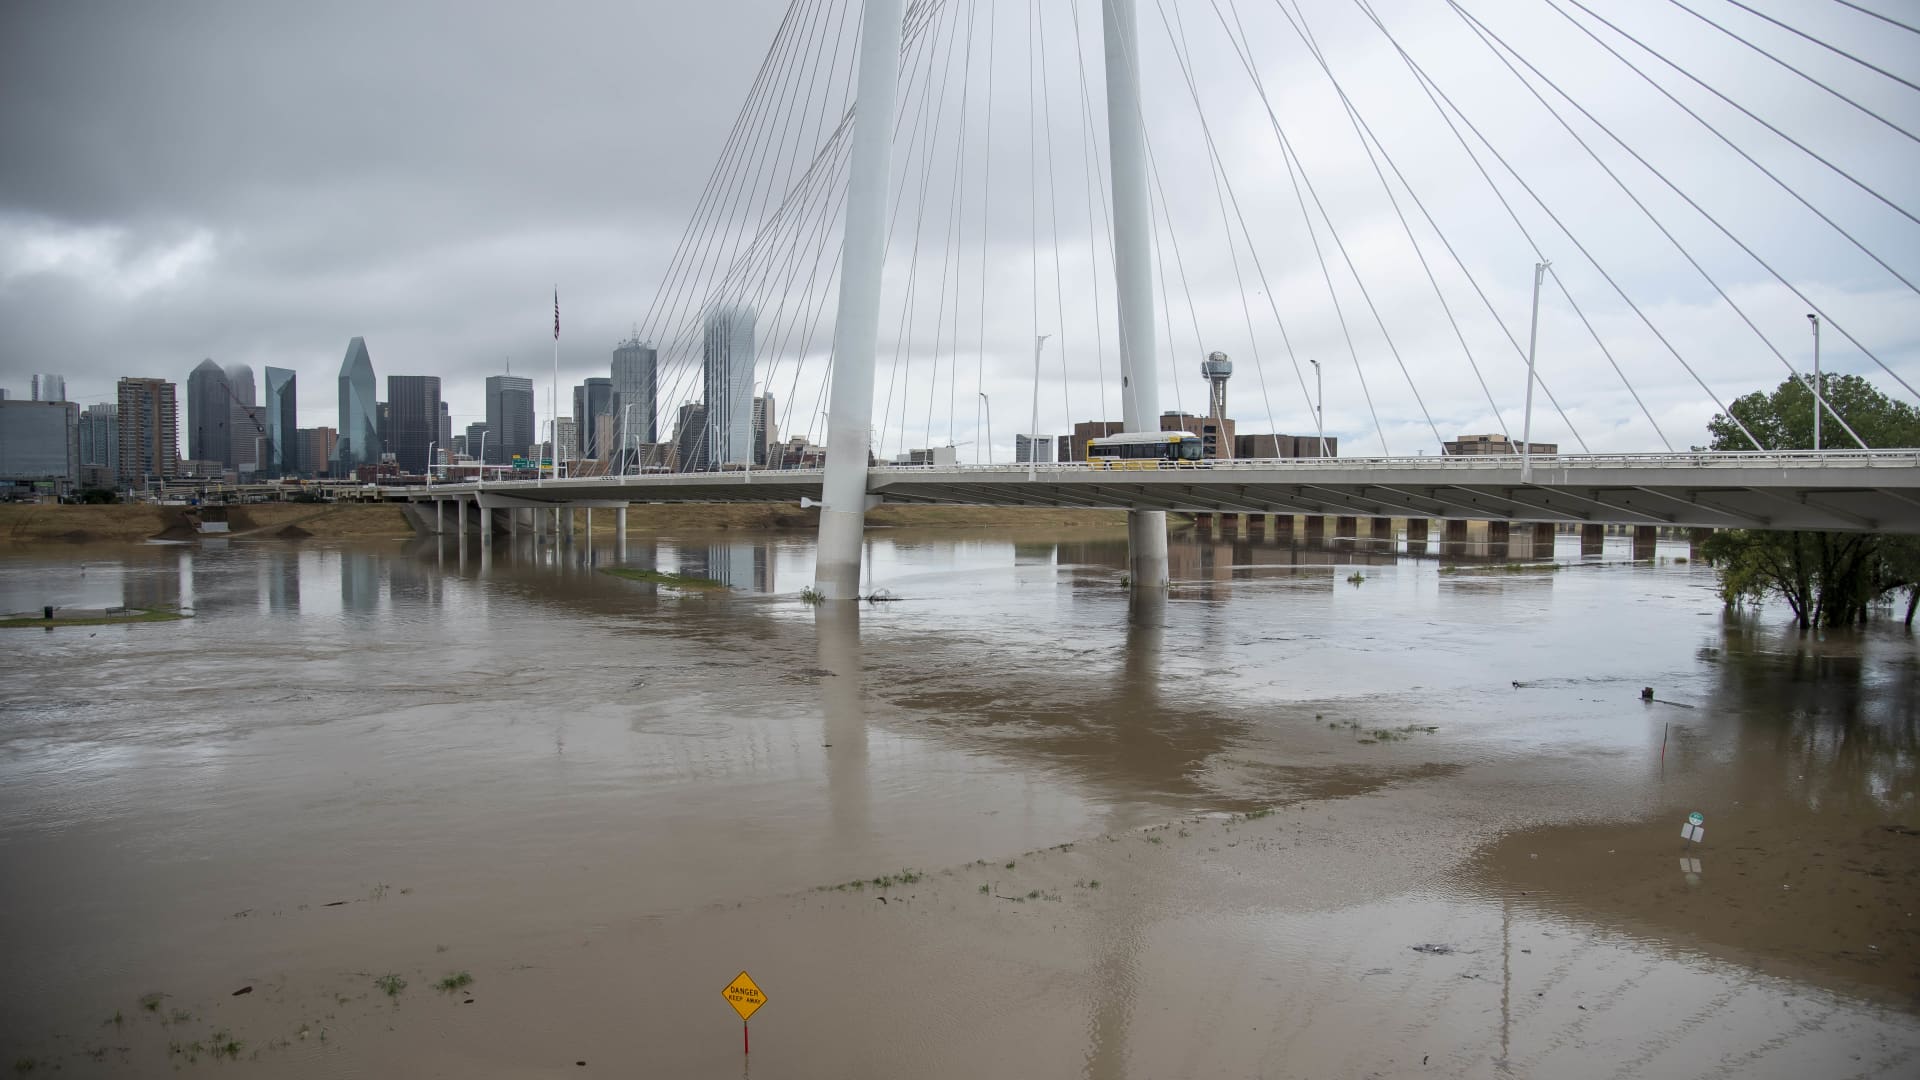 The Trinity River flows through a flooded area in Dallas, Texas on Monday, August 22, 2022. (Emil Lippe for The Washington Post via Getty Images)